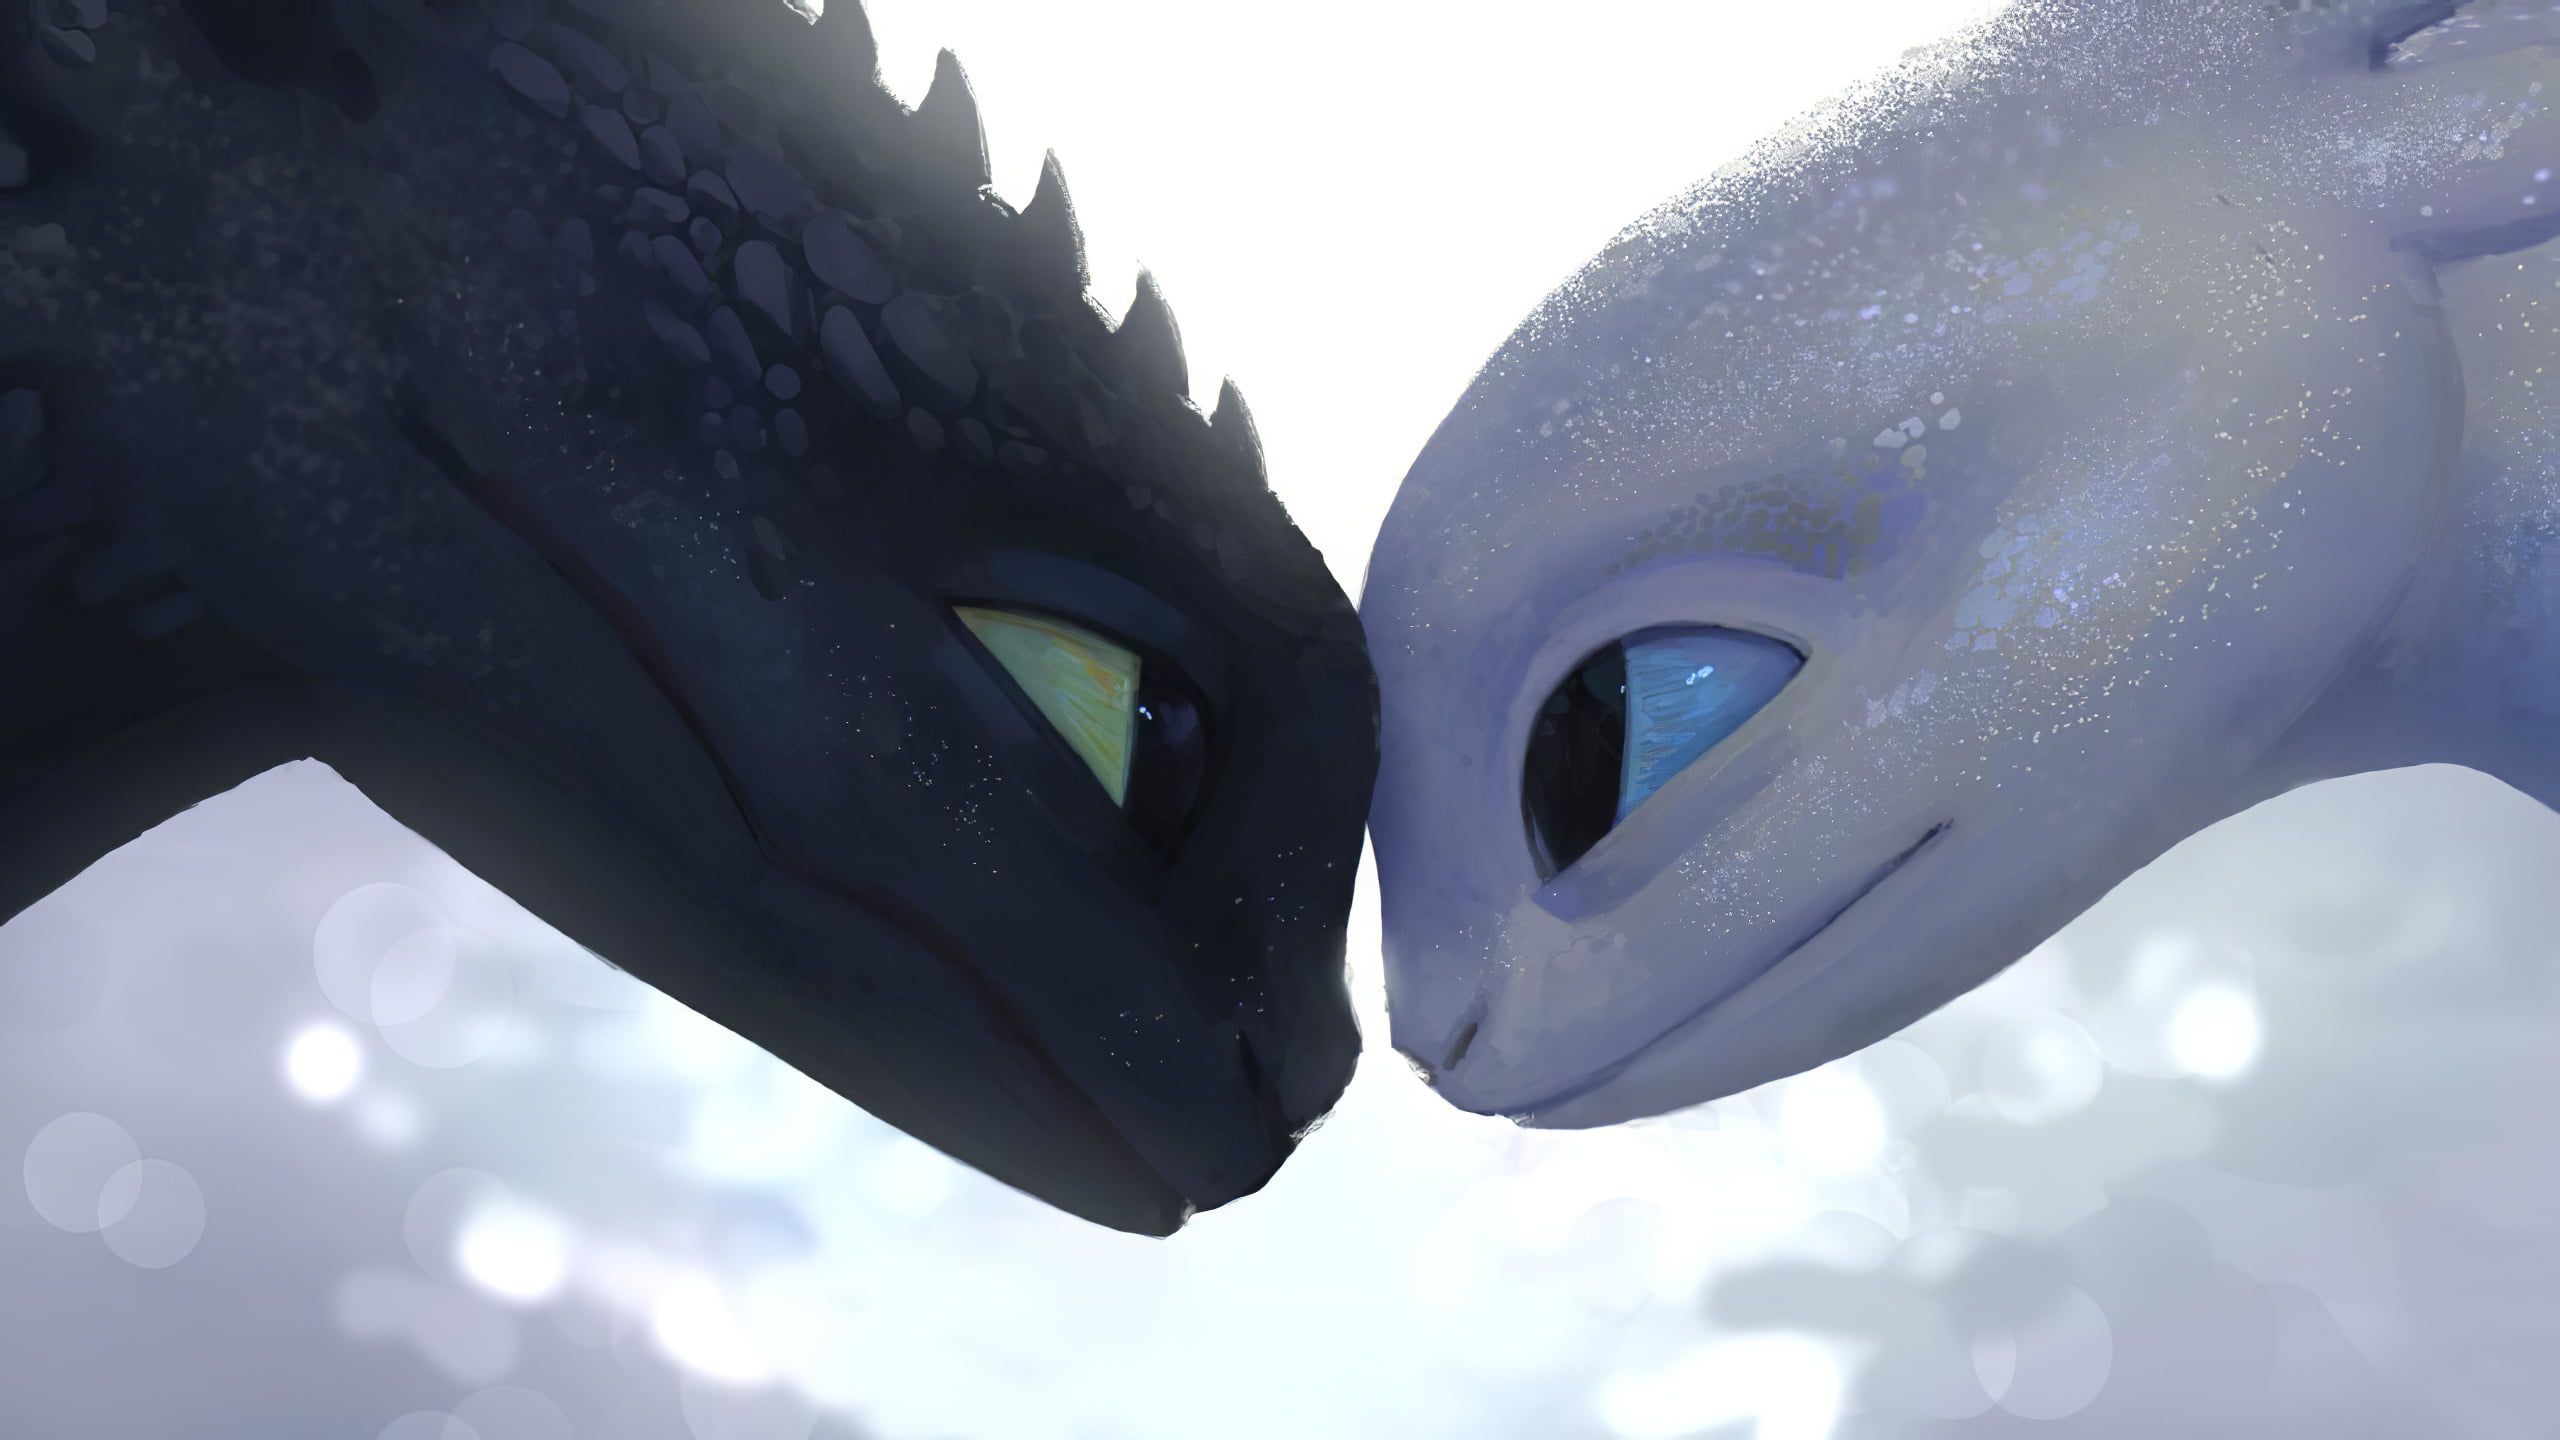 Train Your Dragon, digital, Toothless